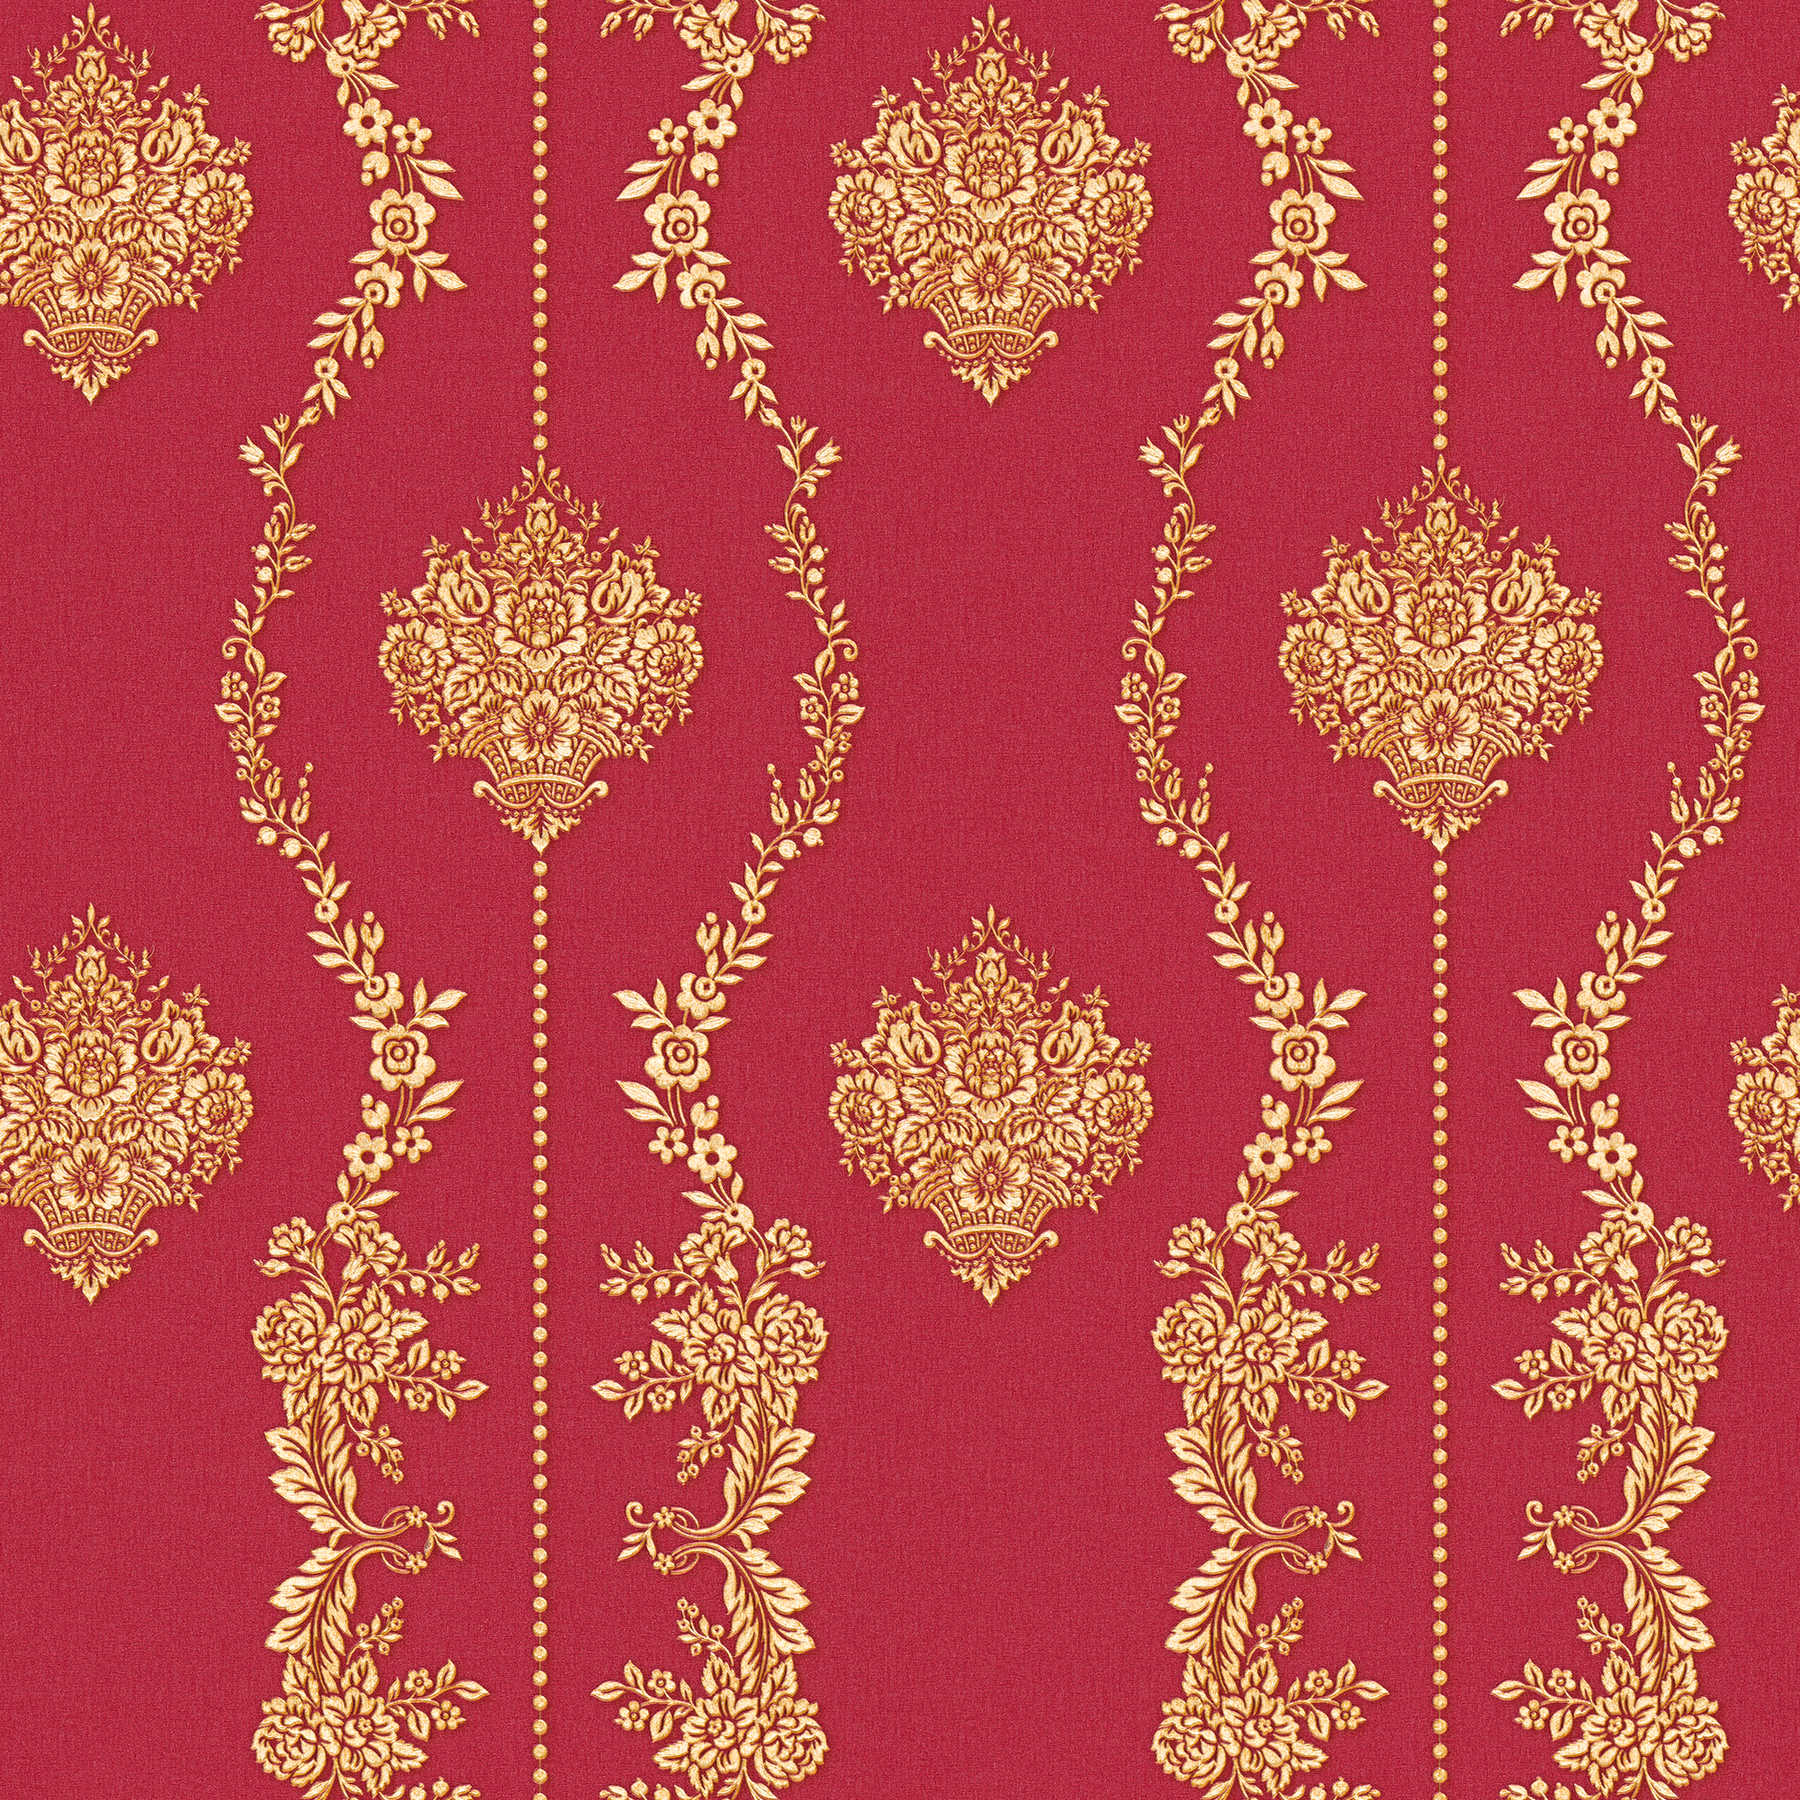 Classic ornament wallpaper with gold effect - metallic, red
